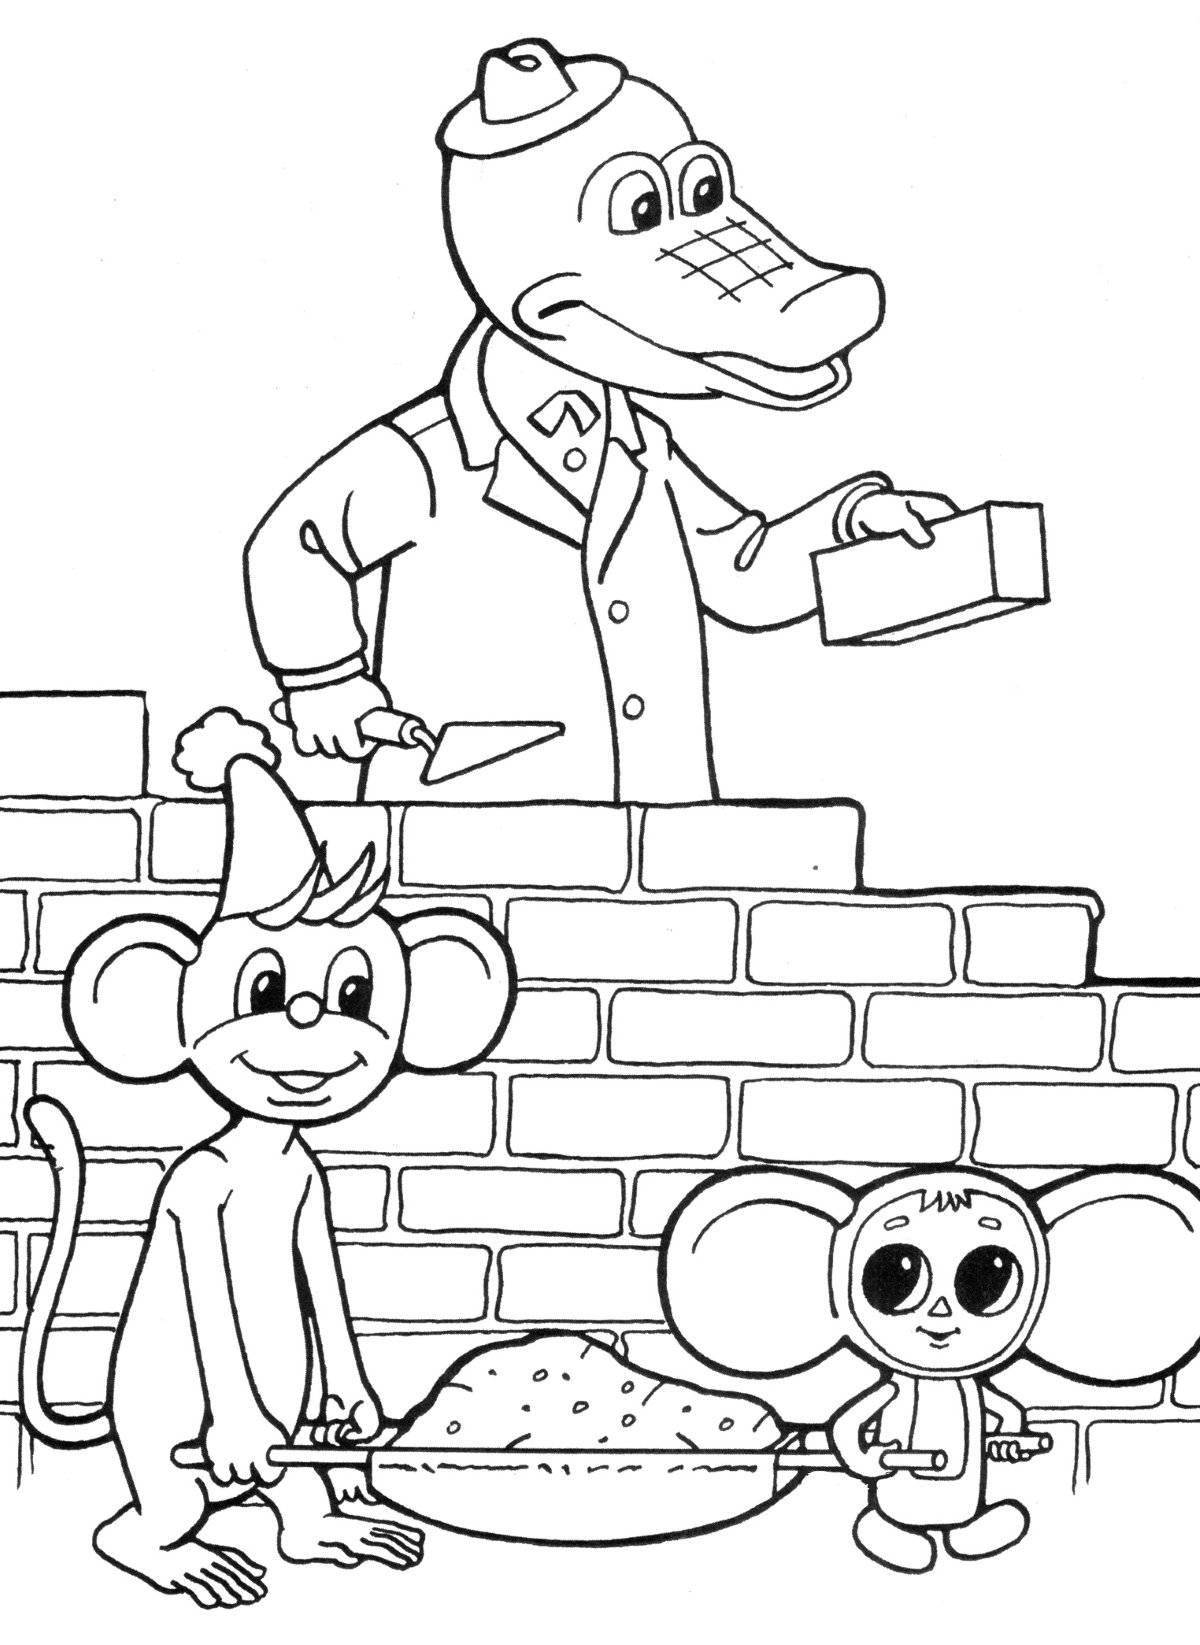 Playful Cheburashka coloring book for children 6-7 years old